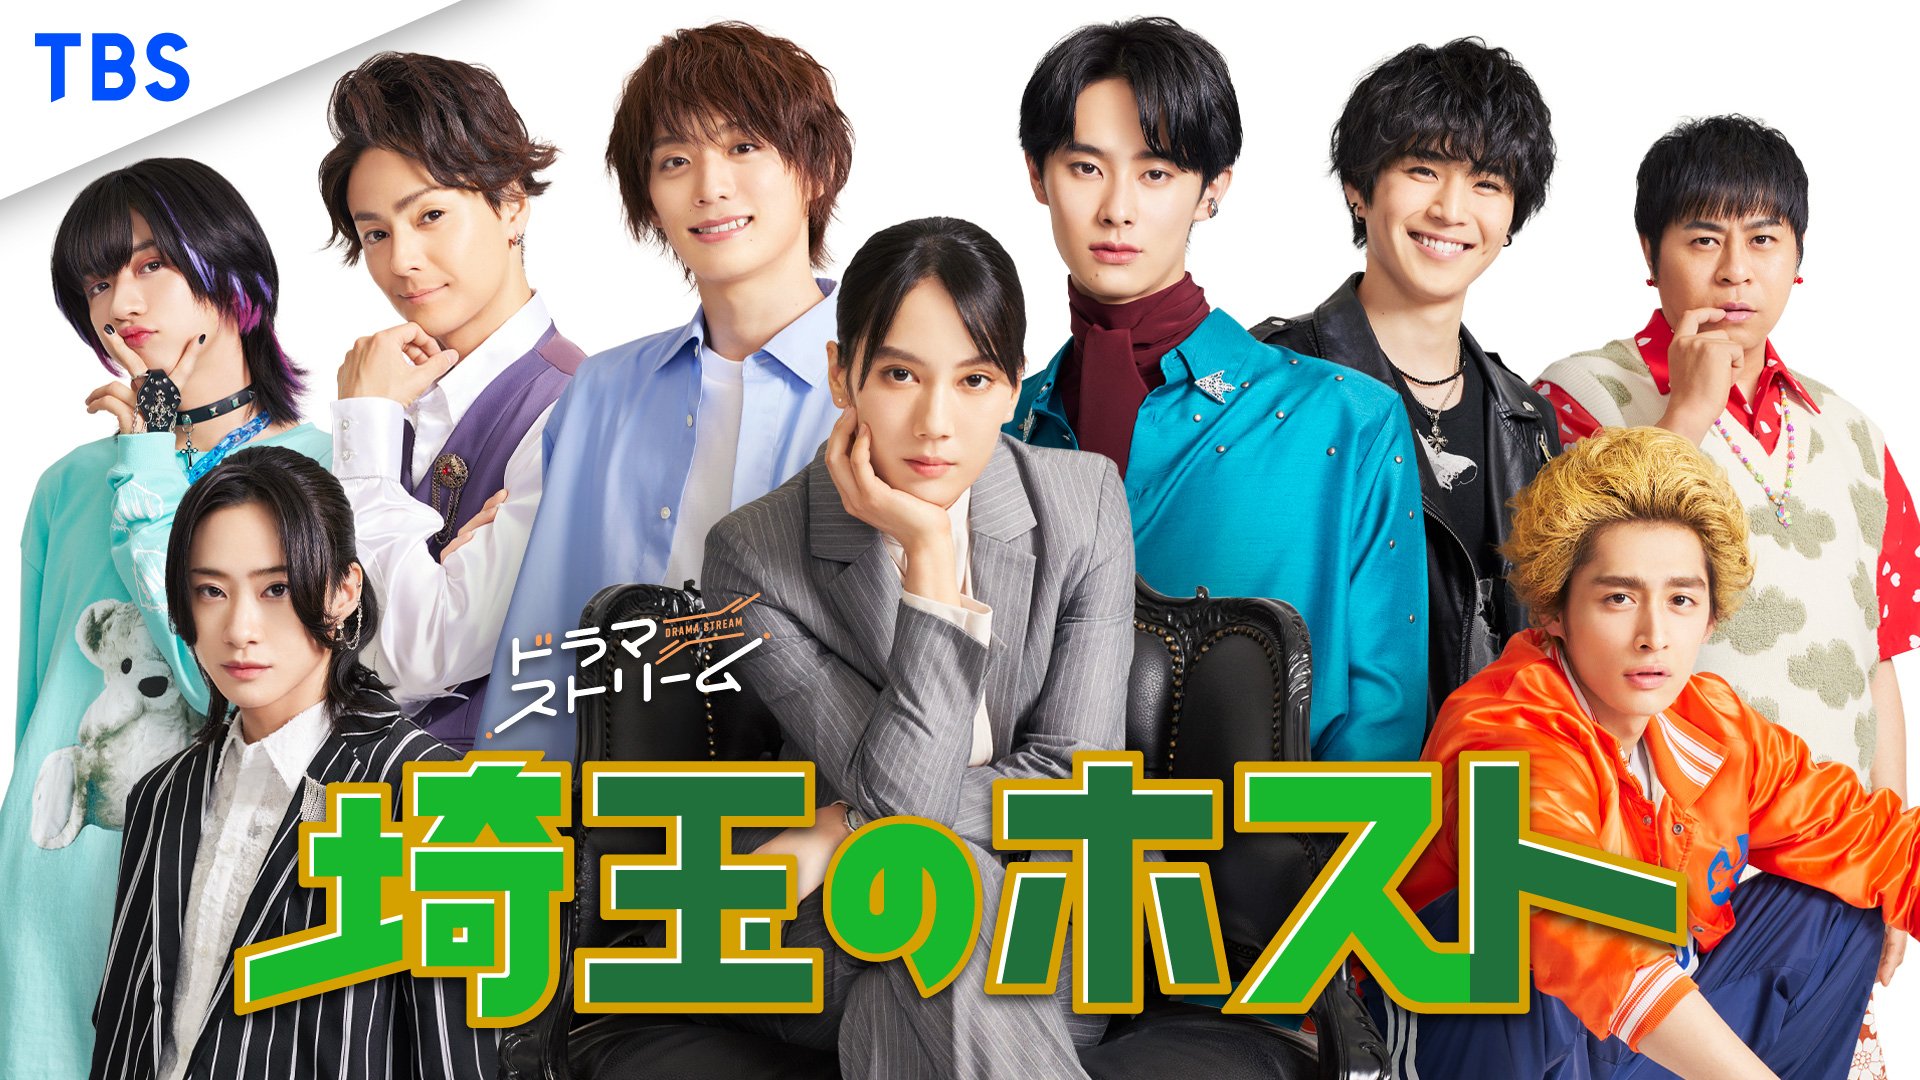 Ouran High School Host Club and Adventures in J-Drama